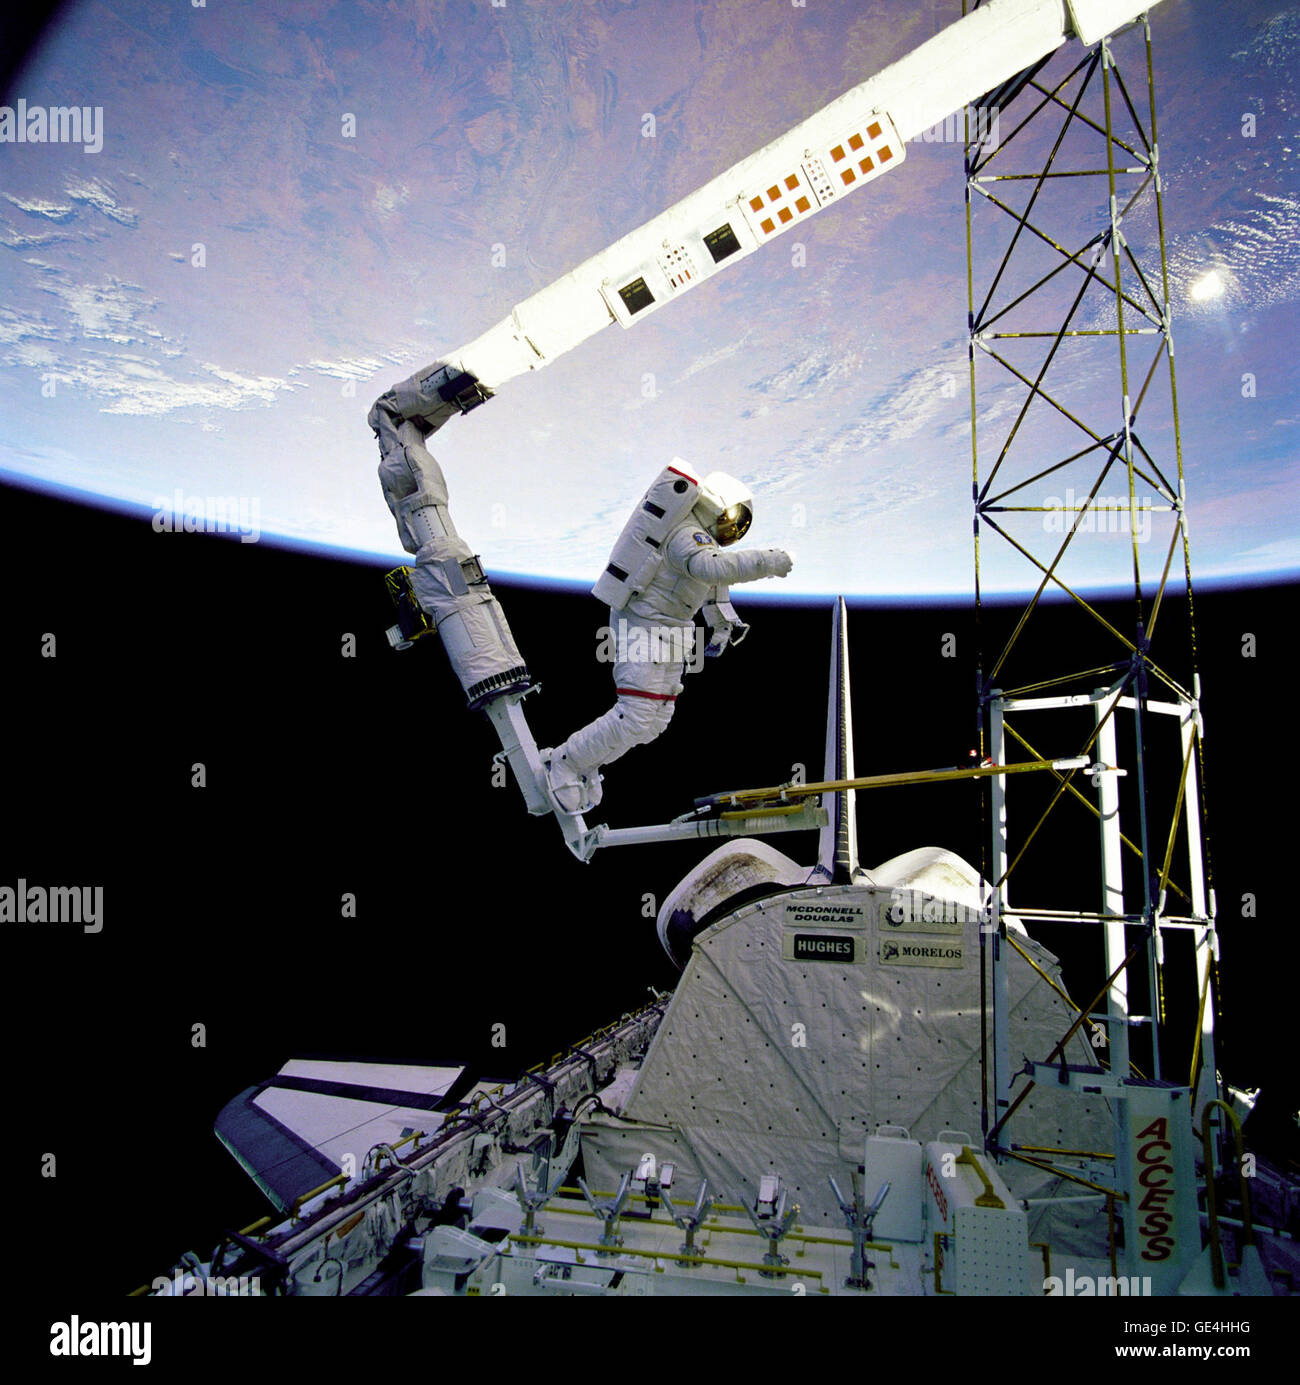 Astronaut Jerry L. Ross, anchored to the foot restraint on the Remote Manipulator System (RMS), approaches the tower-like Assembly Concept for Construction of Erectable Space Structures (ACCESS) device. The structure was just deployed by Ross and astronaut Sherwood Spring as the Atlantis flies over white clouds and blue ocean waters of the Atlantic.  Image # : 61B-41-019  Date: December 1, 1985 Stock Photo